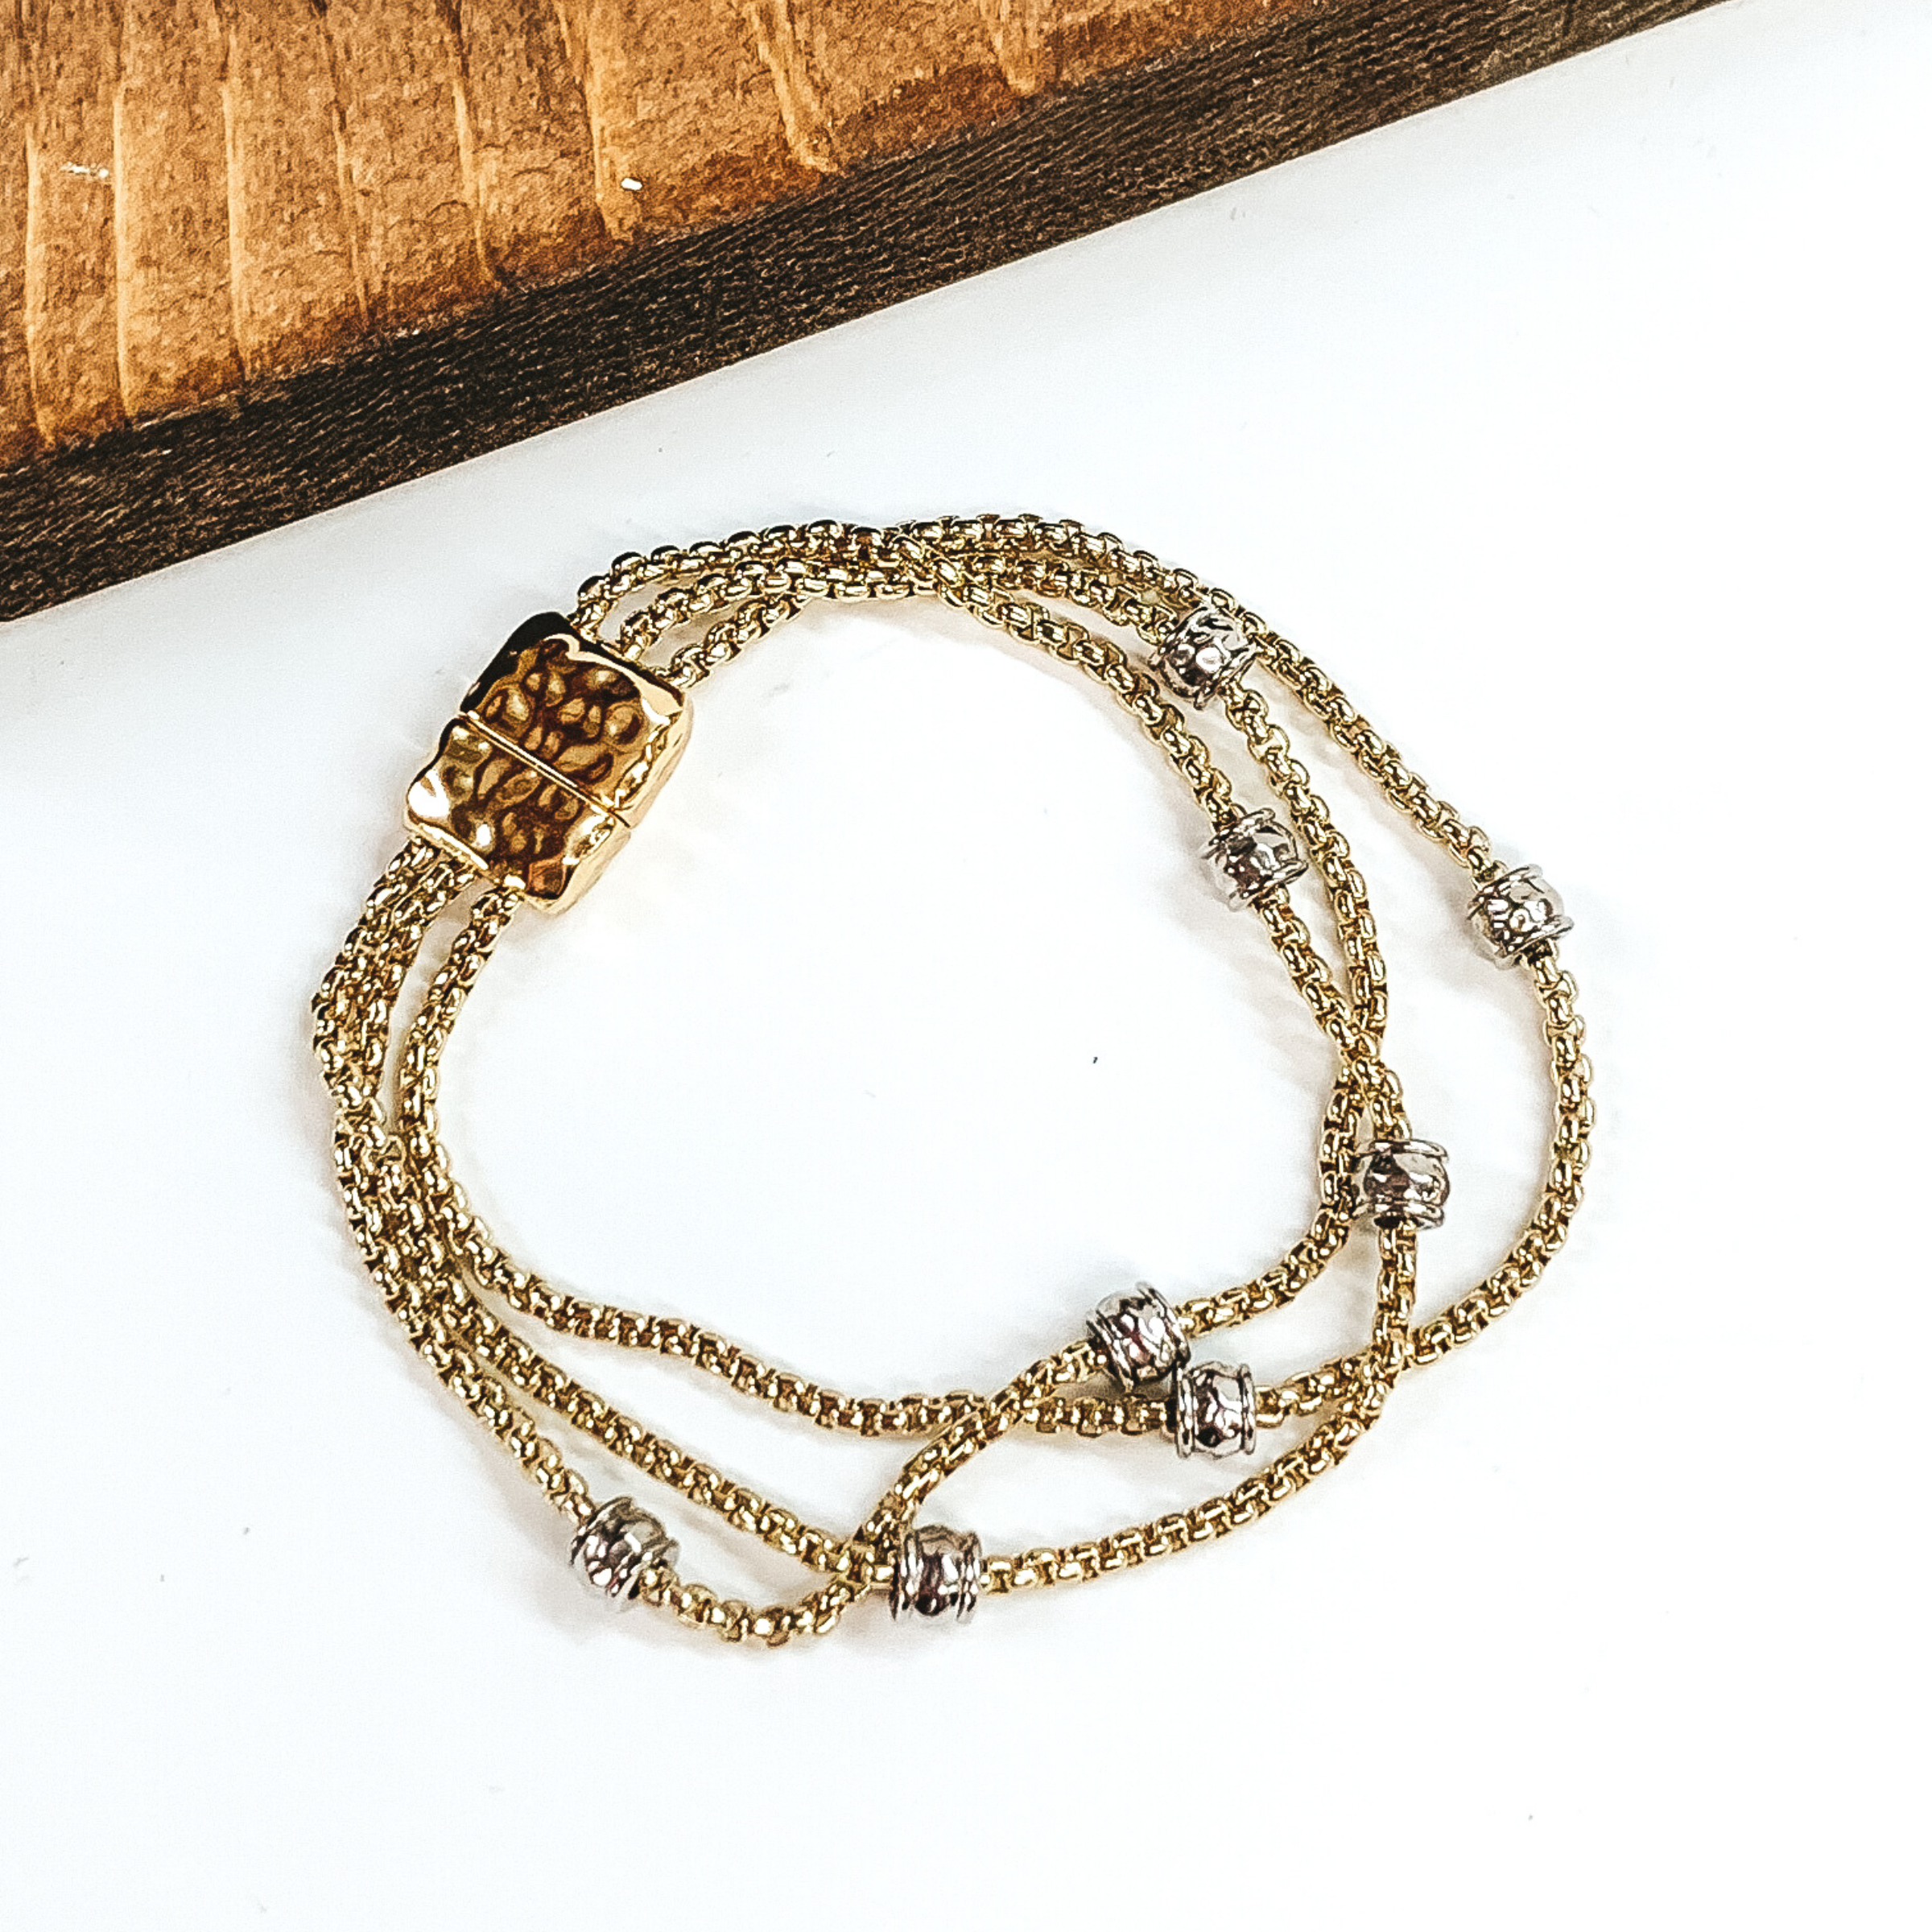 Gold, three stranded bracelet with silver spacers. This bracelet has a magnetic clasp. This bracelet is pictured on a white background.